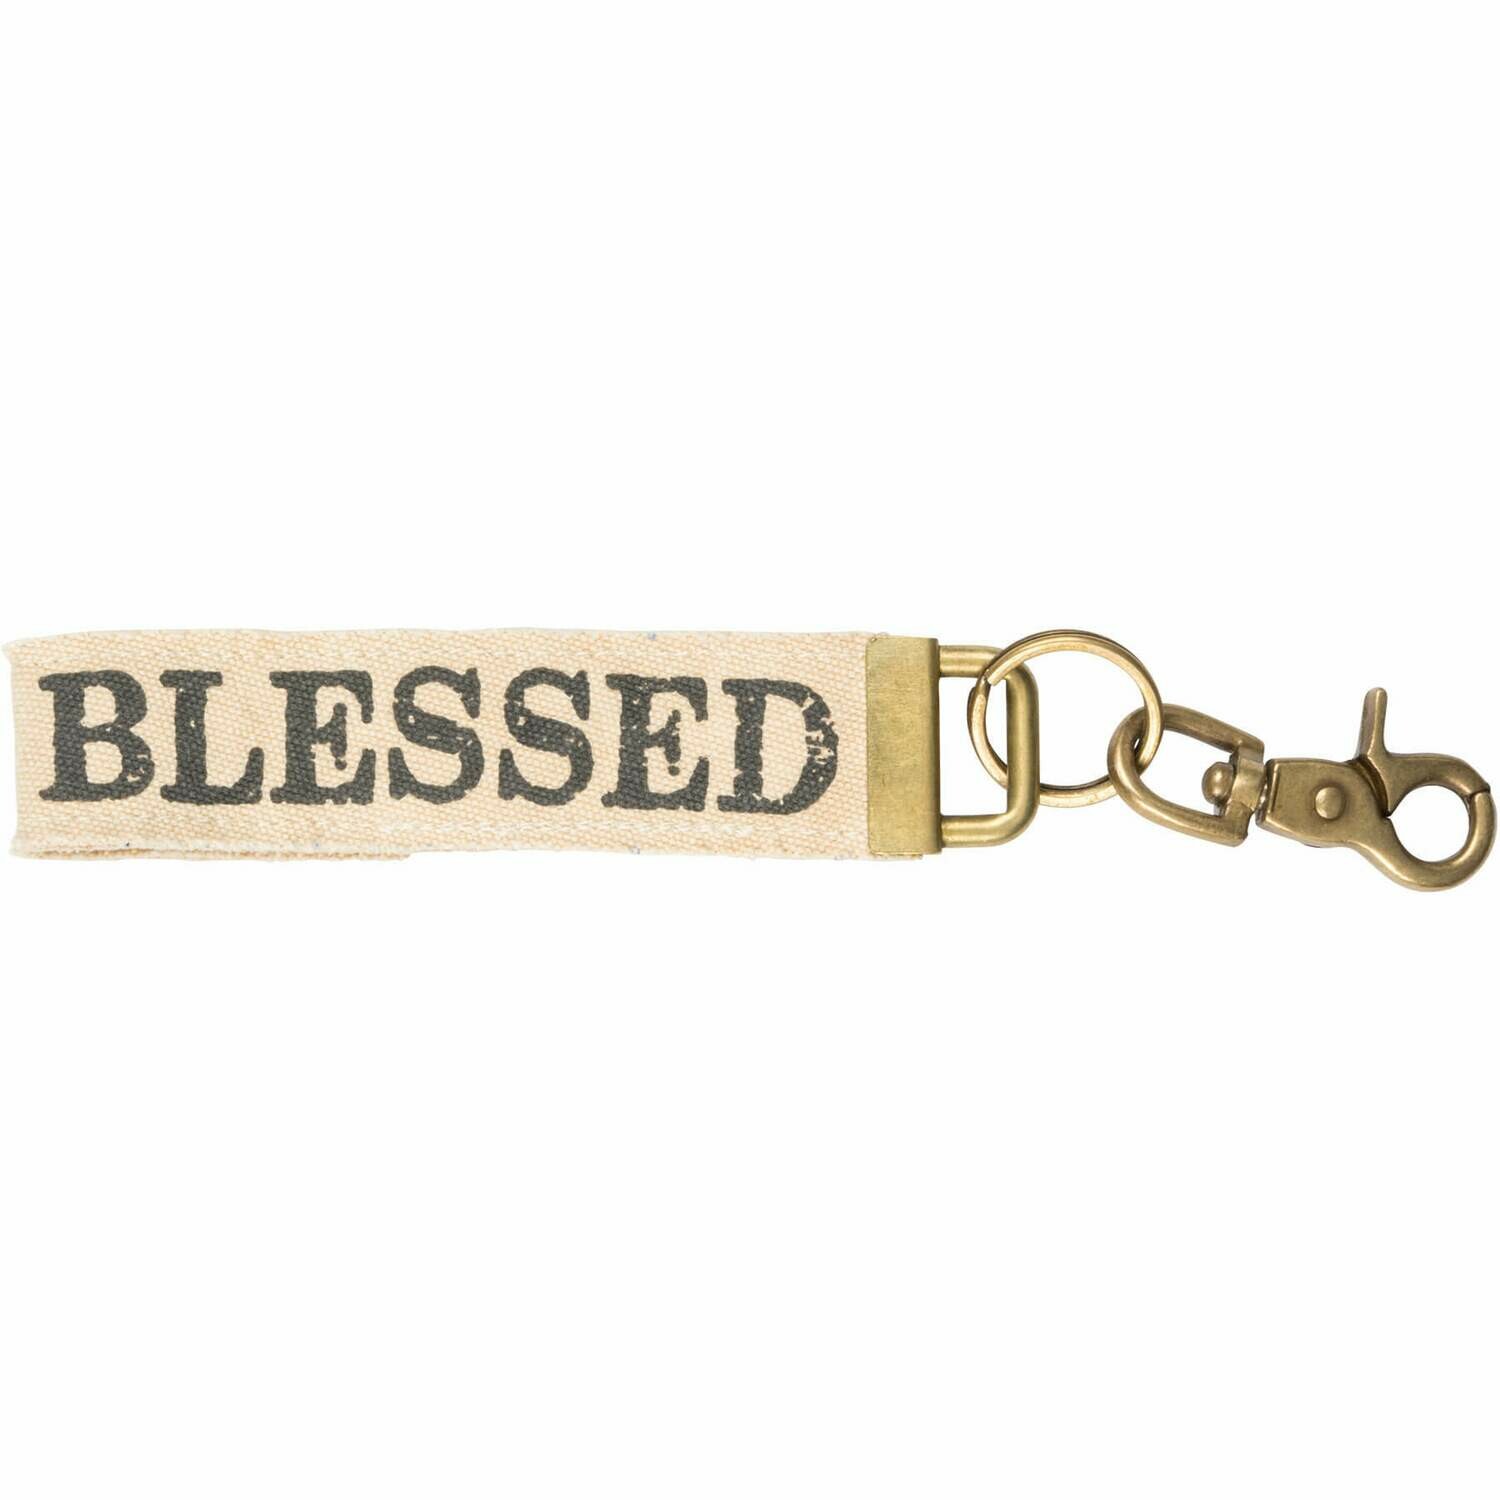 Blessed Canvas Key Fob